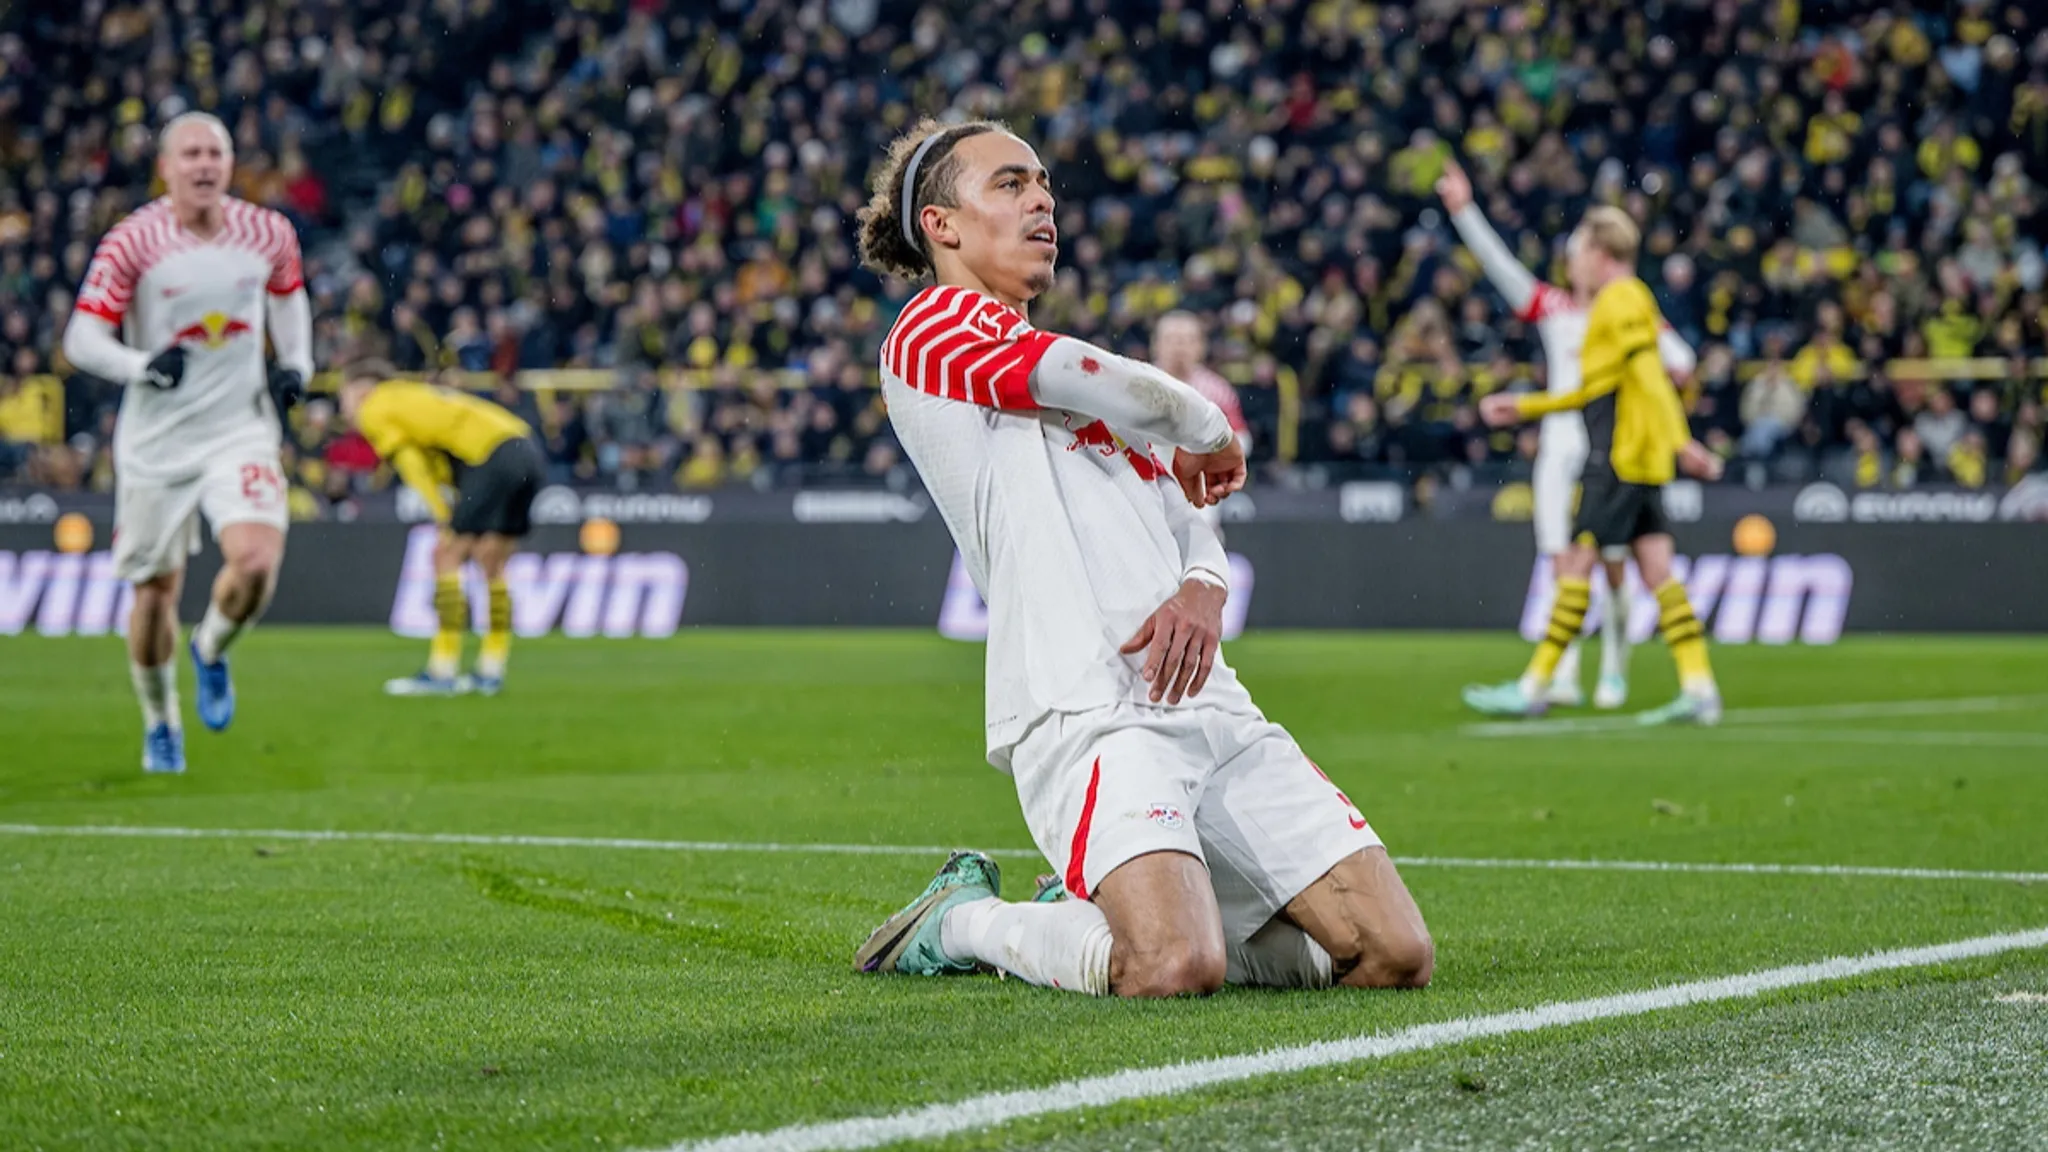 Yussuf Poulsen also scored at least one league goal in his eleventh season.